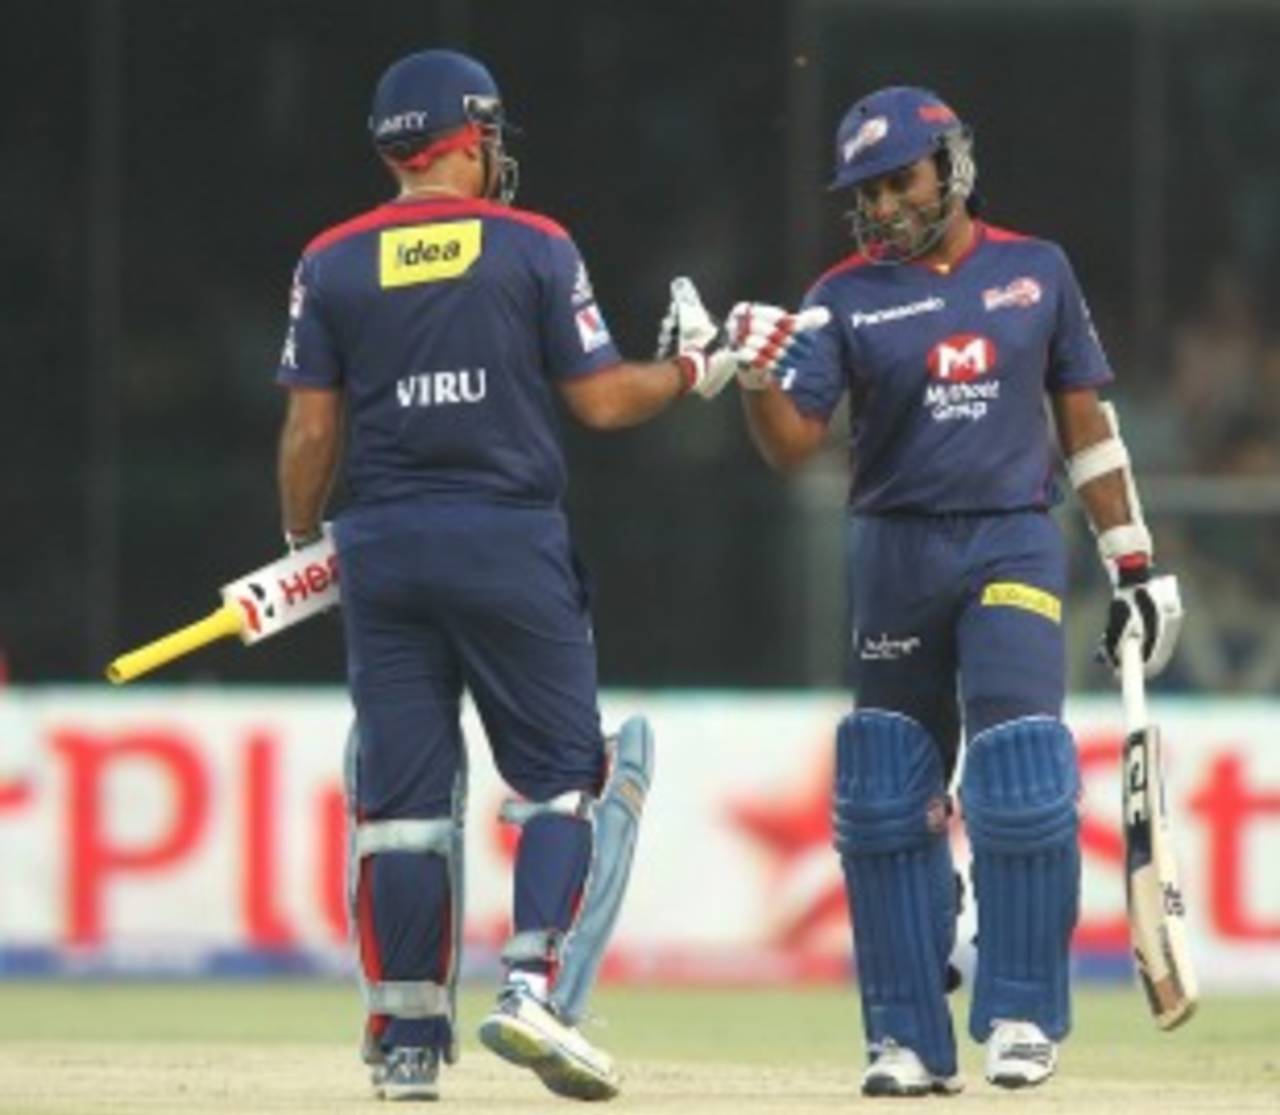 Mahela Jayawardene: "[Virender Sehwag's batting] allowed me to play freely and I could control the innings"&nbsp;&nbsp;&bull;&nbsp;&nbsp;BCCI